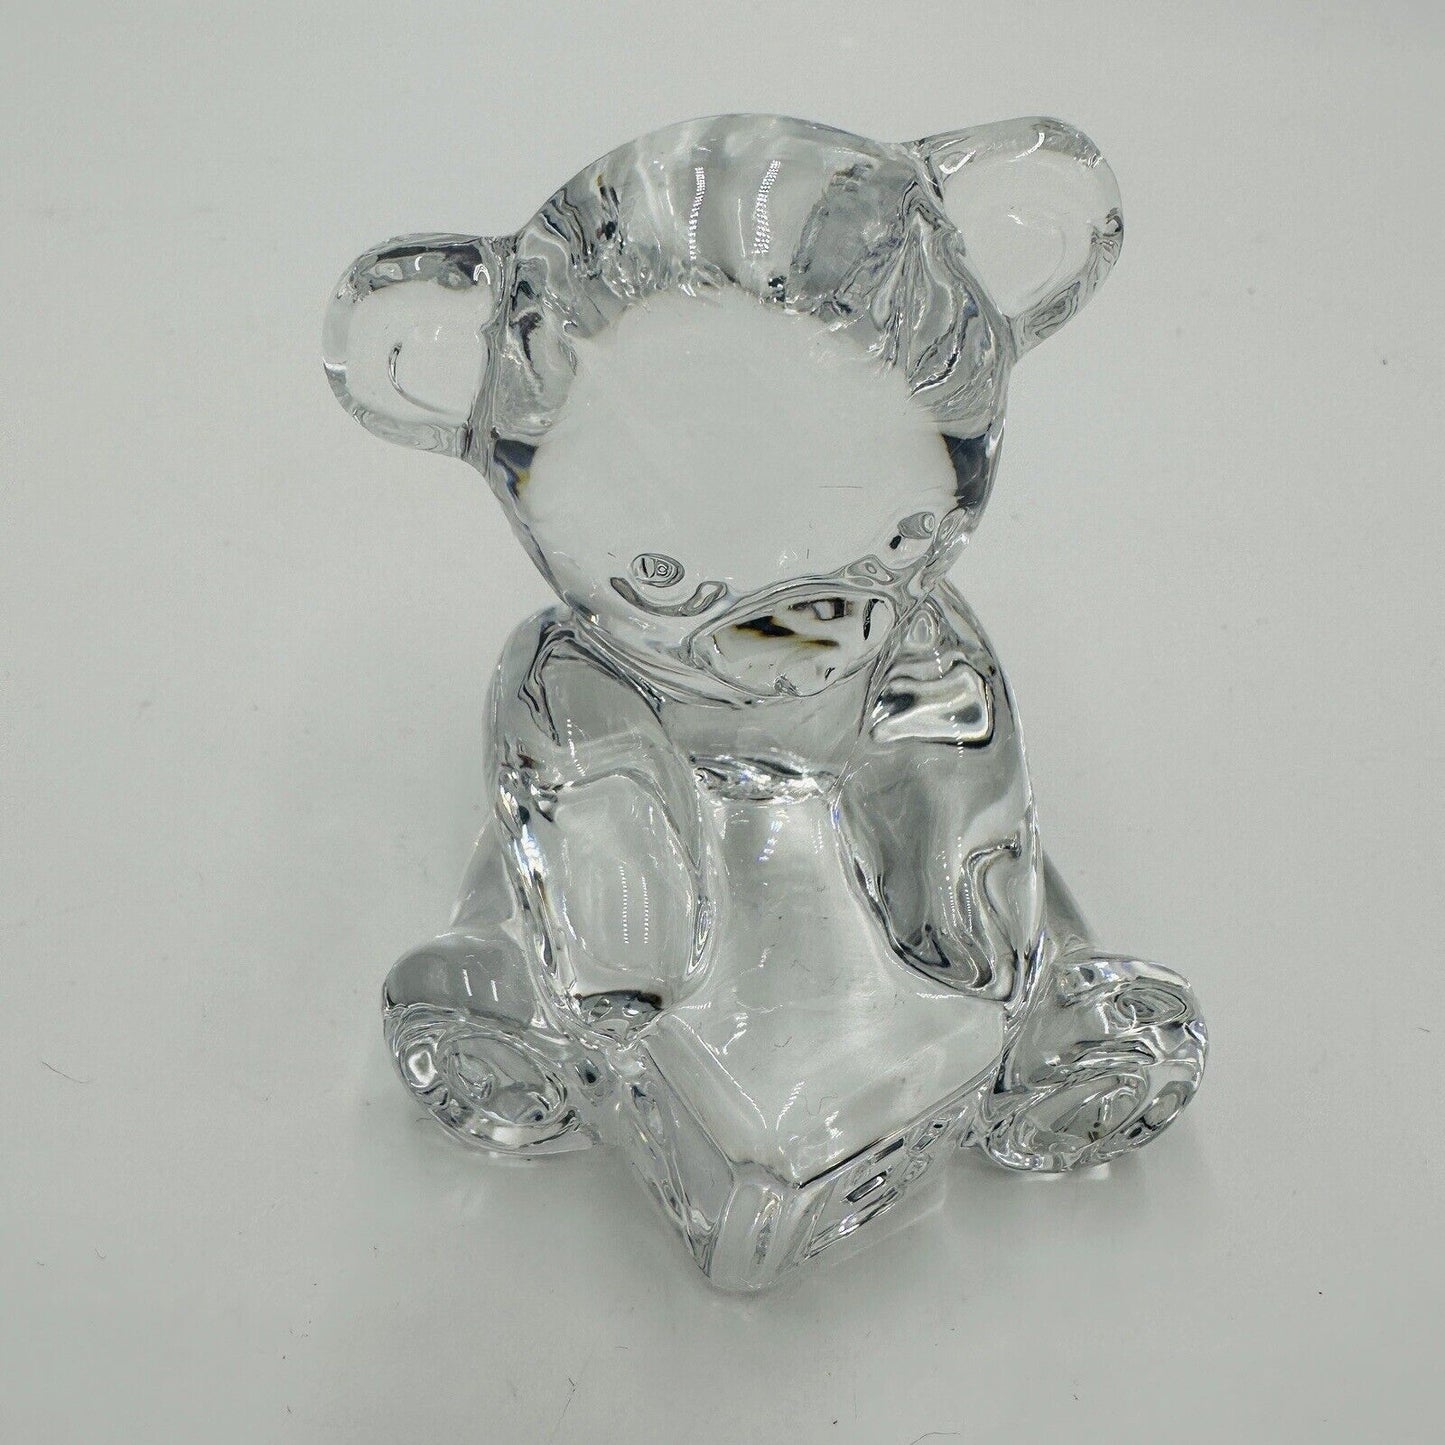 Waterford Crystal Figurine Teddy Bear ABC Block Paperweight 3in Vintage Clear